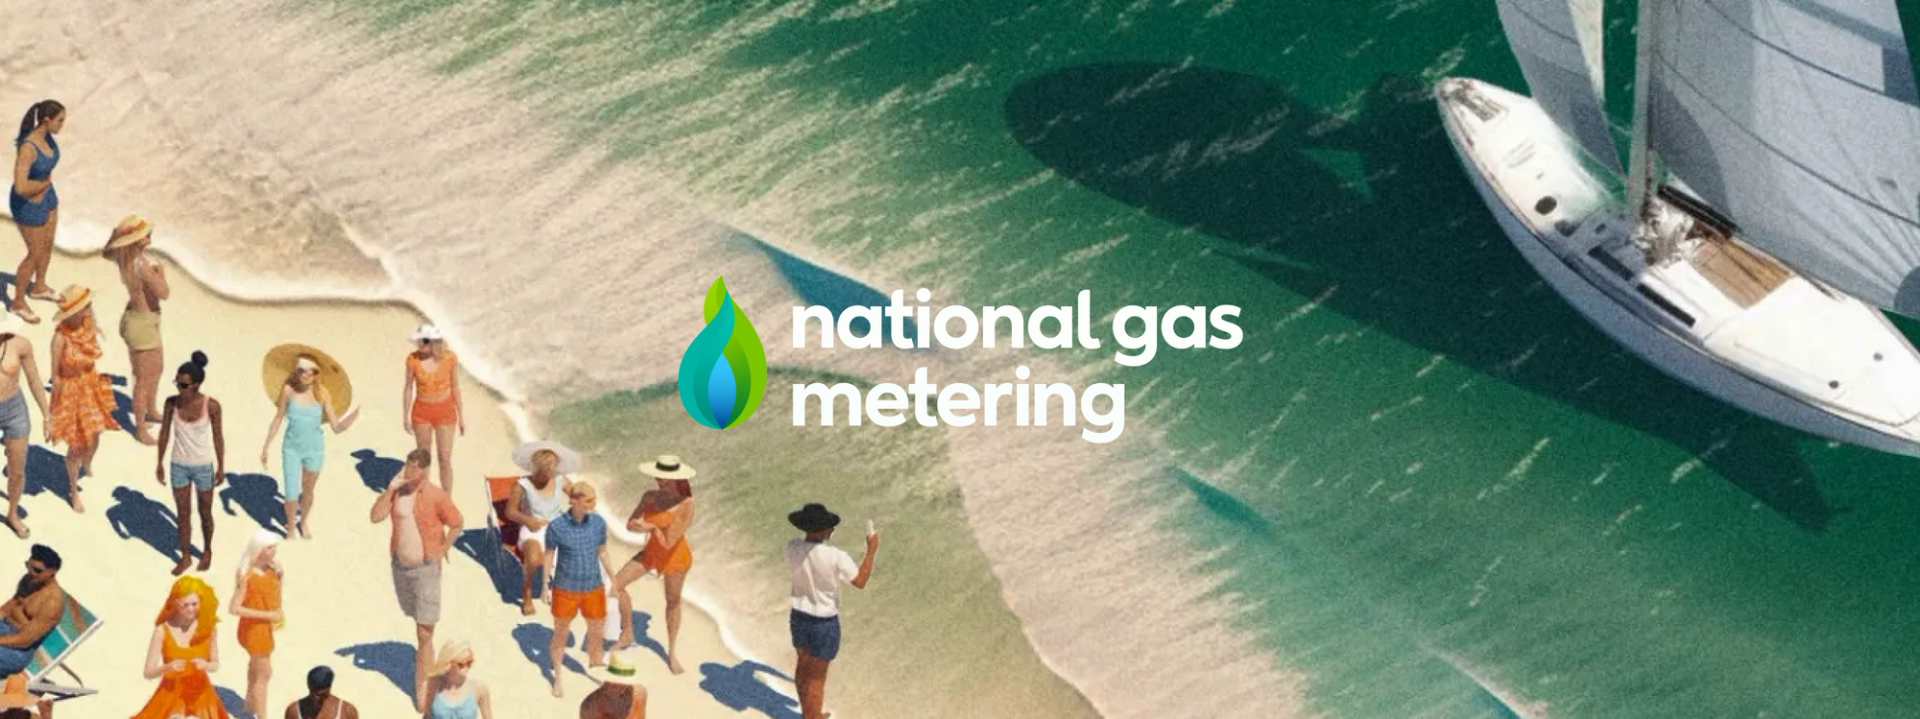 AI-Driven Imagery Revolution: National Gas Metering's Game-Changing Brand Library